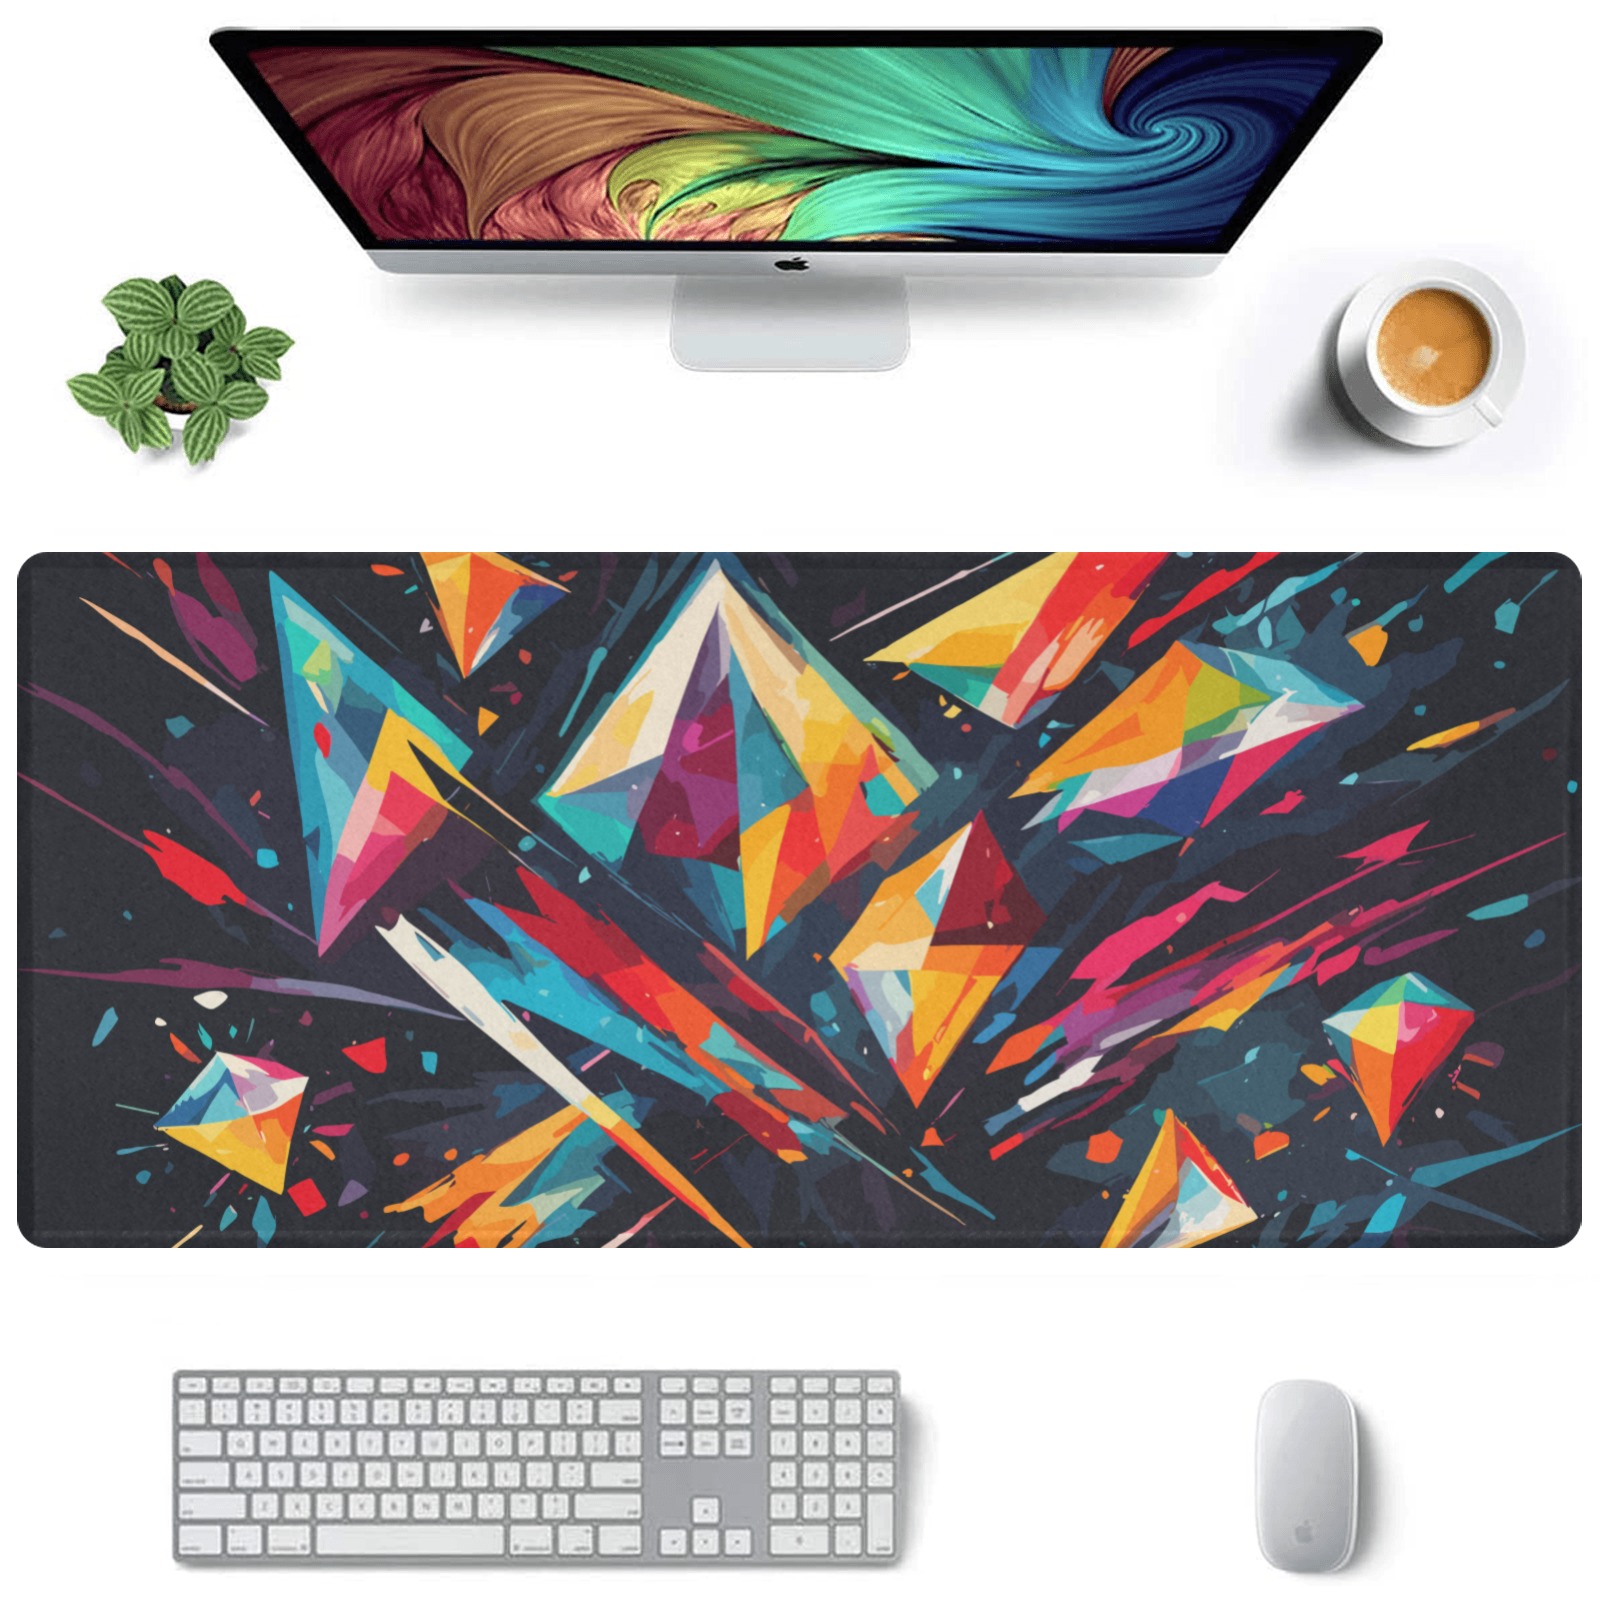 Diamond brilliant shapes. Colorful abstract art Gaming Mousepad (35"x16")